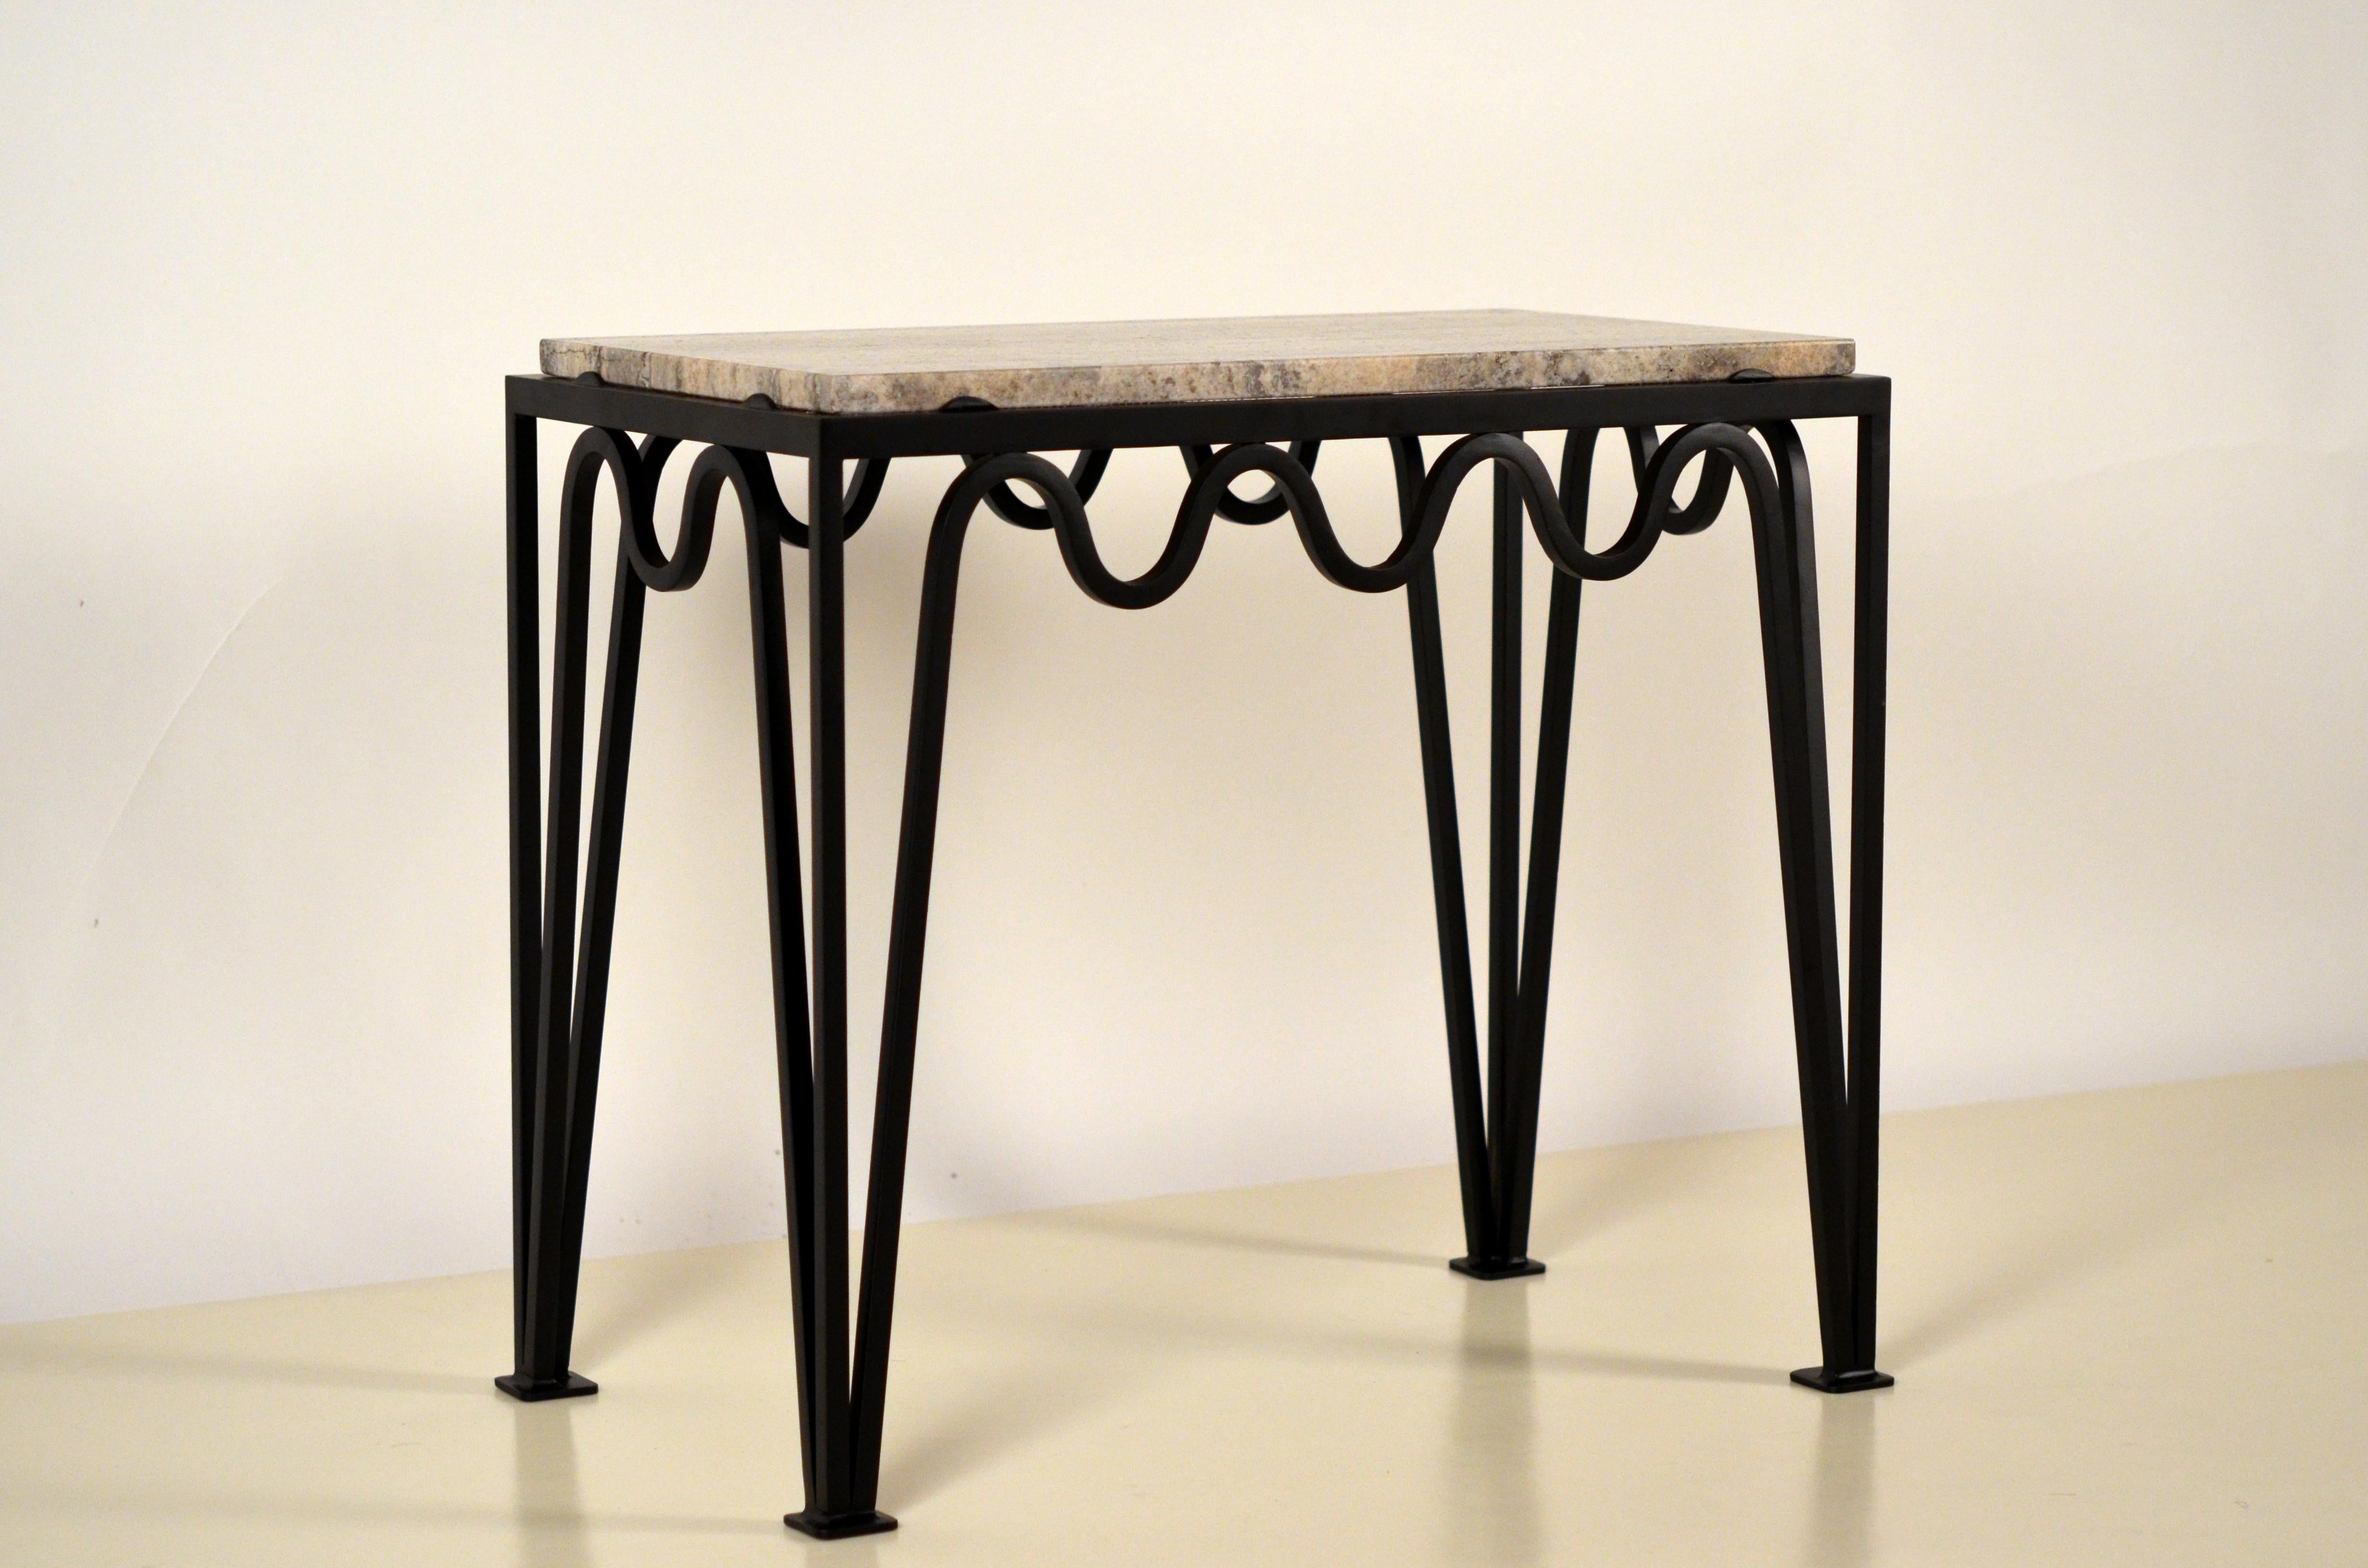 'Méandre' black iron and silver travertine side table by Design Frères.

Chic and understated.